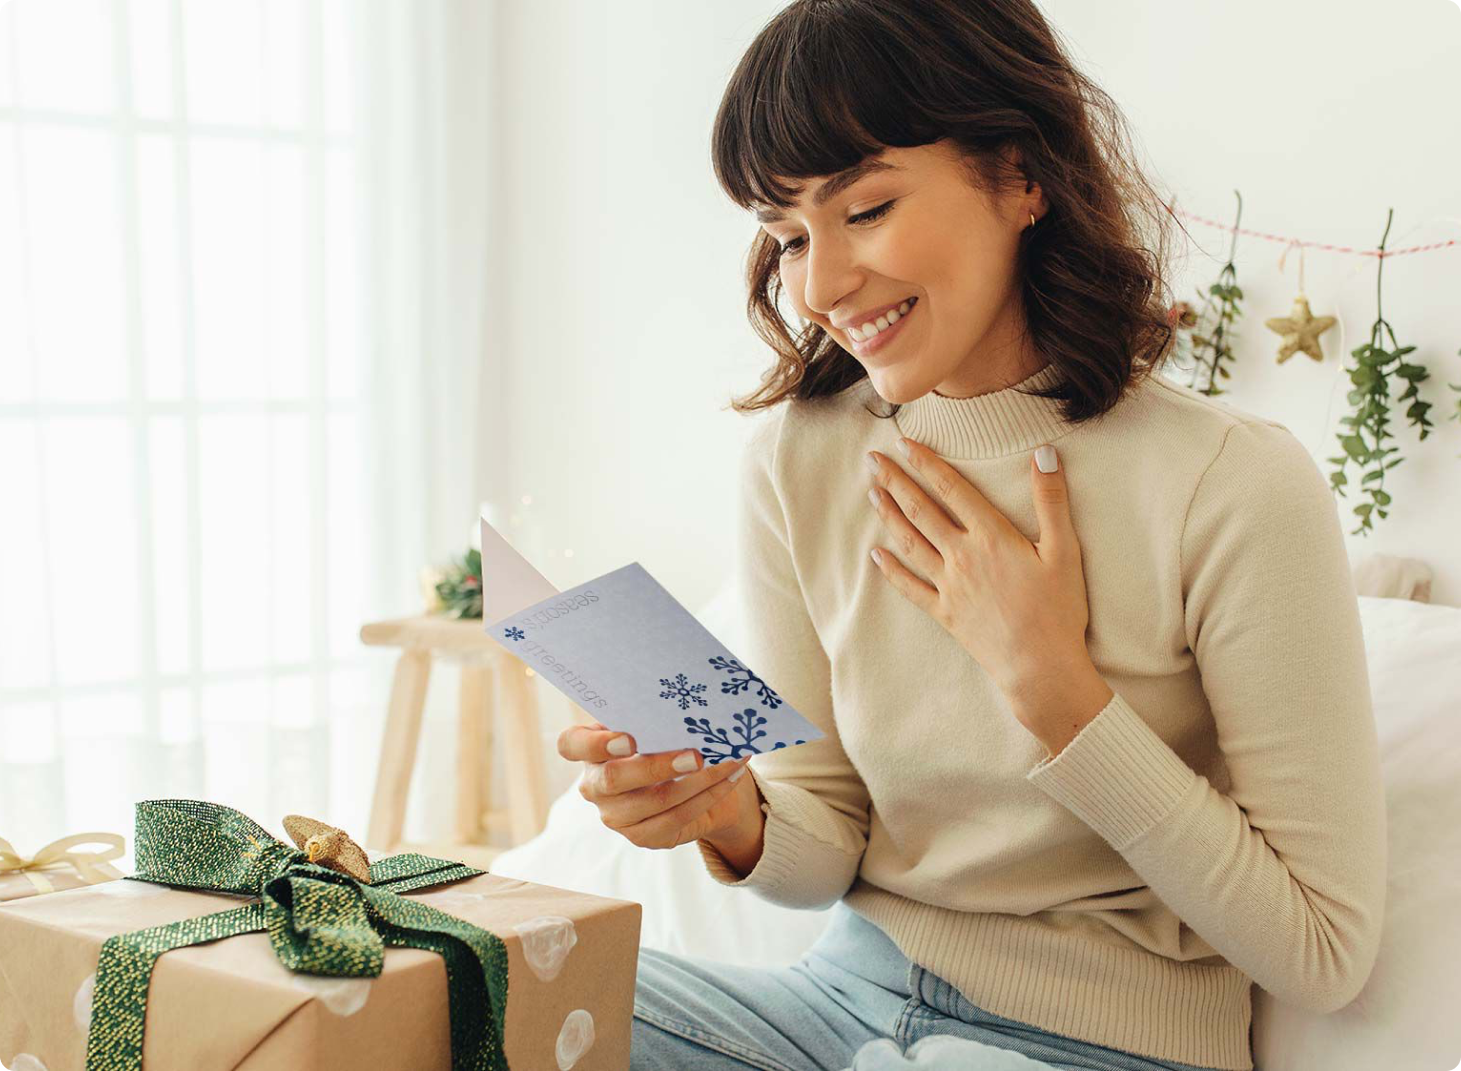 Give Holiday Cards from your CEO or Executive Team